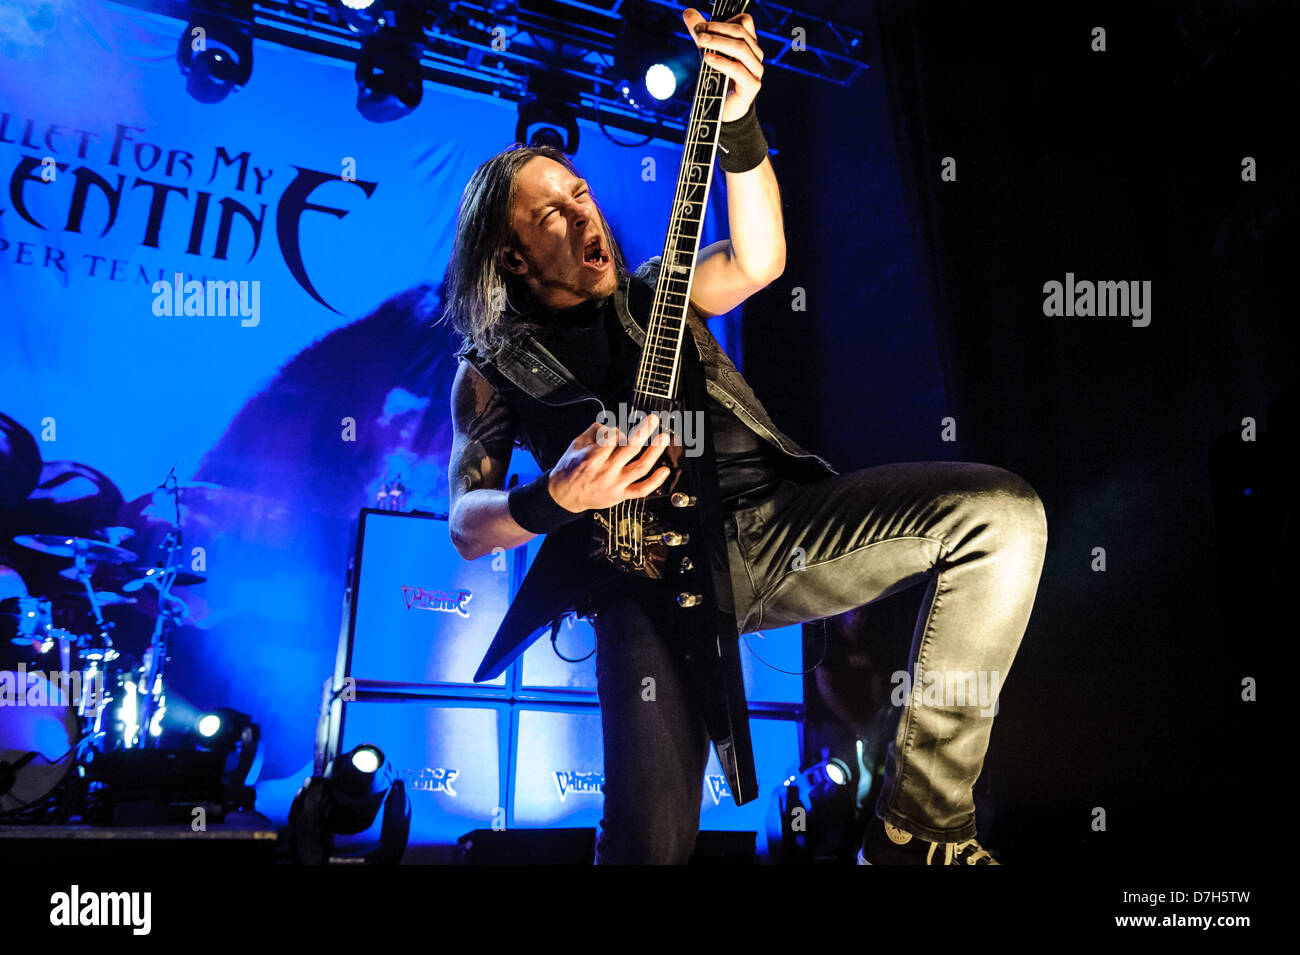 Toronto, Ontario, Canada. 7th May 2013. British heavy metal band 'Bullet For My Valentine' performed at Sound Academy in Toronto. Pictured: lead guitarist MICHAEL 'PADGE' PAGET (Credit Image: Credit:  Igor Vidyashev/ZUMAPRESS.com/Alamy Live News) Stock Photo